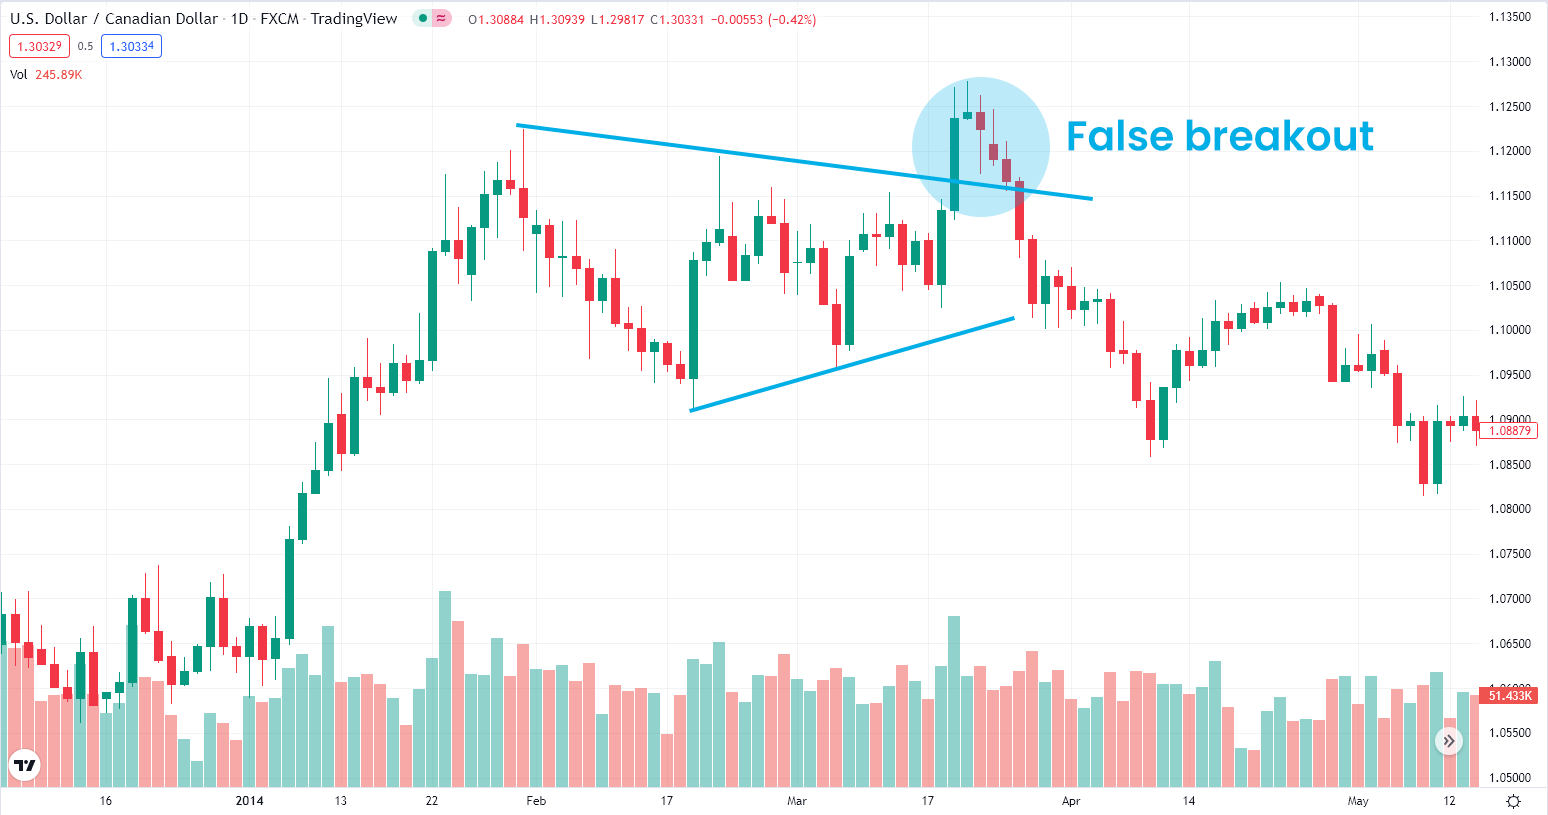 Fade the Breakout